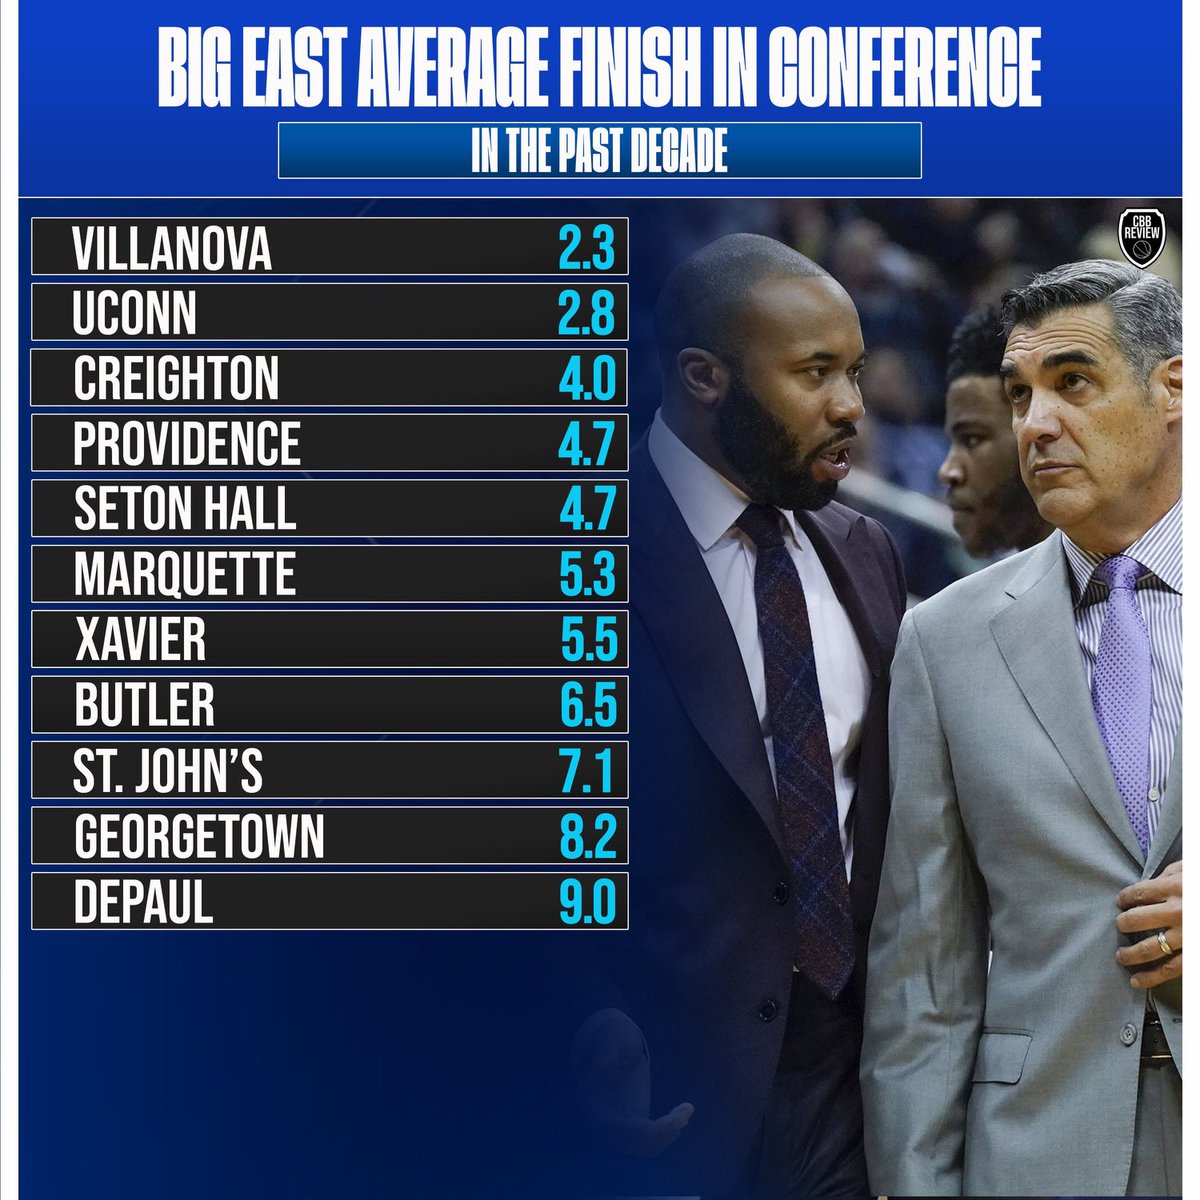 Here’s what the Big East has looked like over the past 10 seasons.

Any surprises?